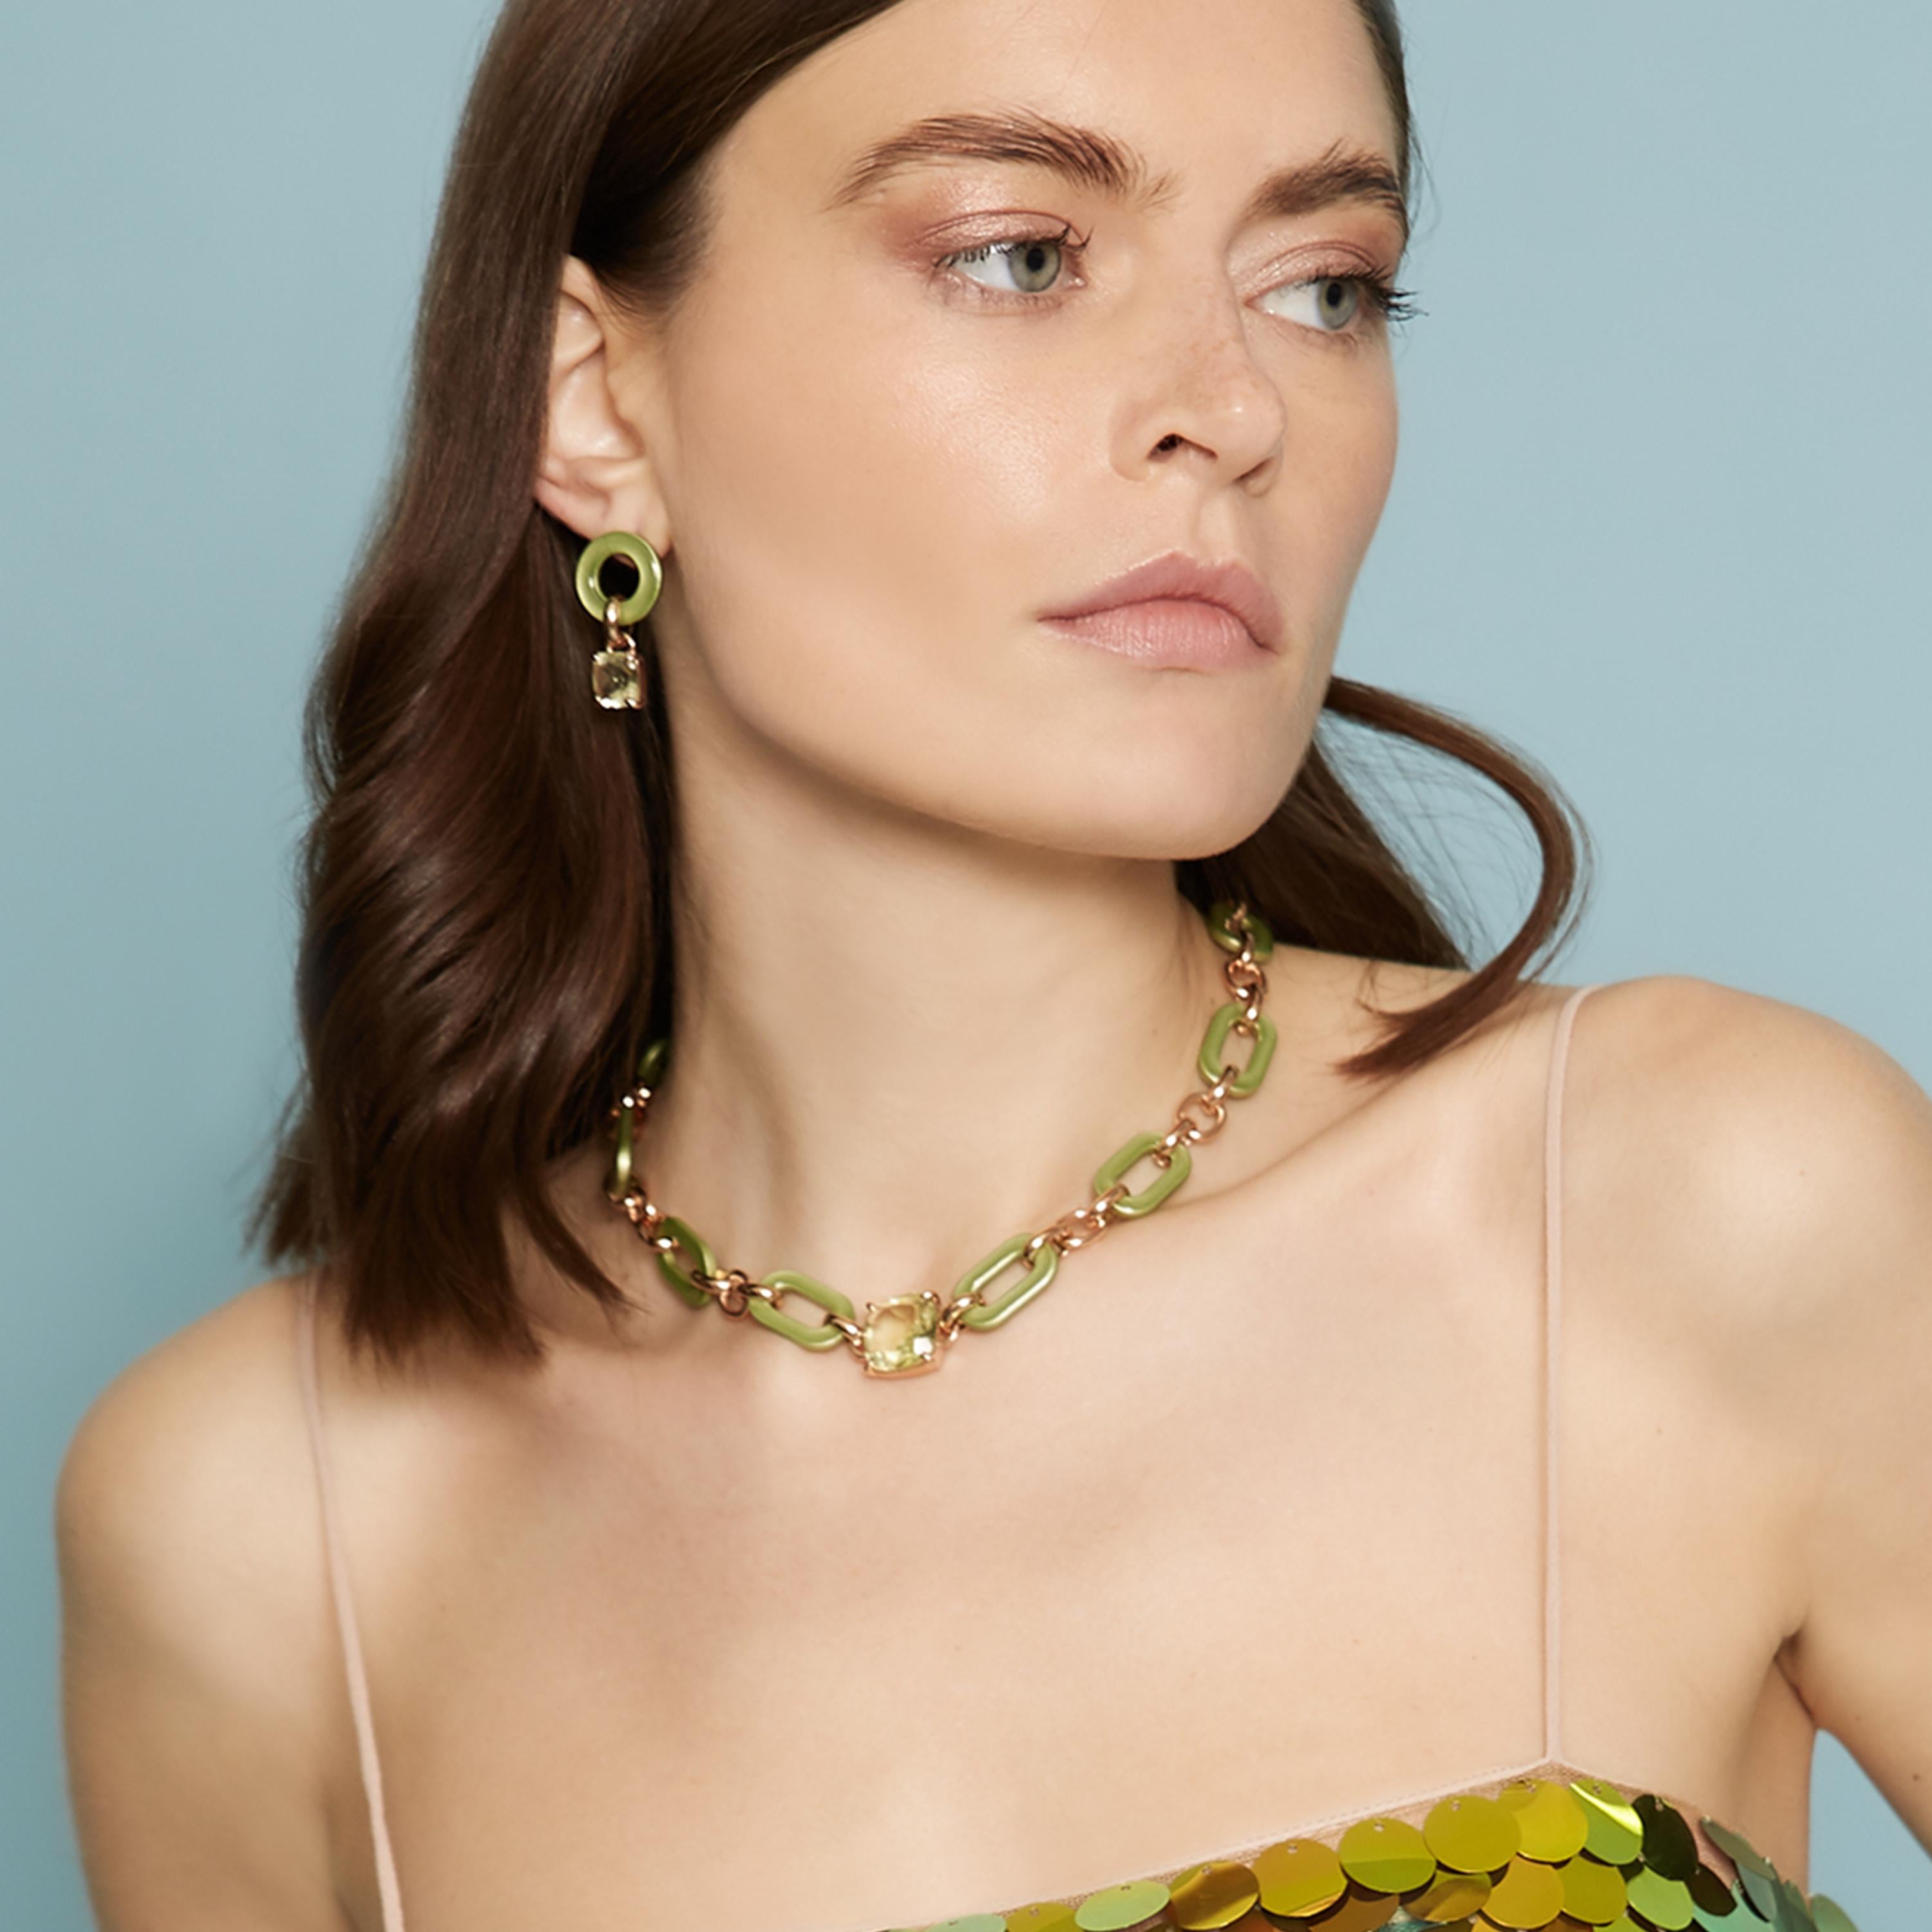 ROSSOPREZIOSO chain choker is hand made in Italy, in hand-made lacquered and enameled olive wood, 24-karat gold plated anti-allergic metal, embellished with hydrothermal quartz.
The color of the wood is a brilliant blue and the gem is an intense and